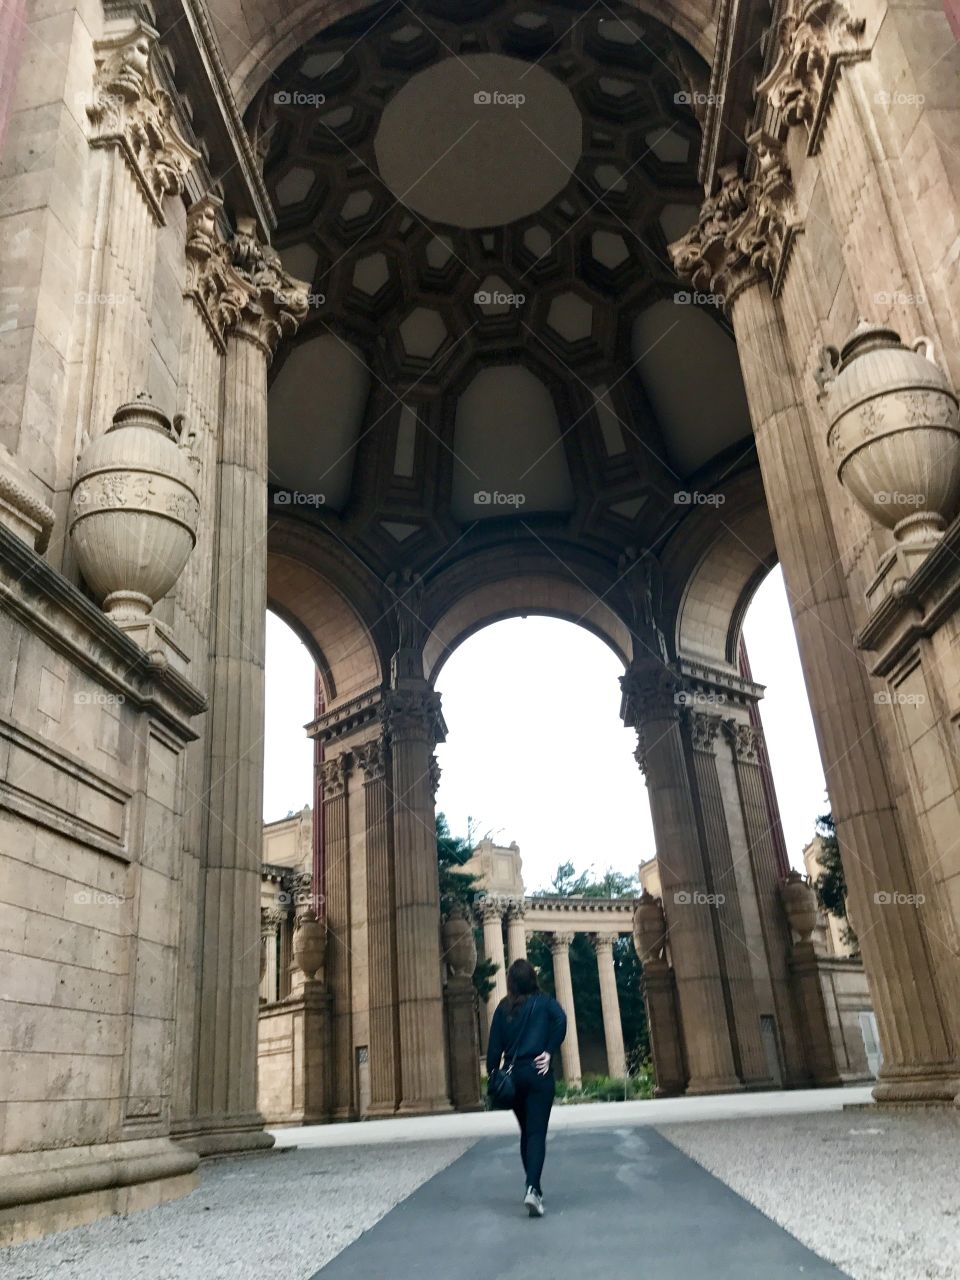 Exploring the Palace is Fine Arts at San Fransisco. 